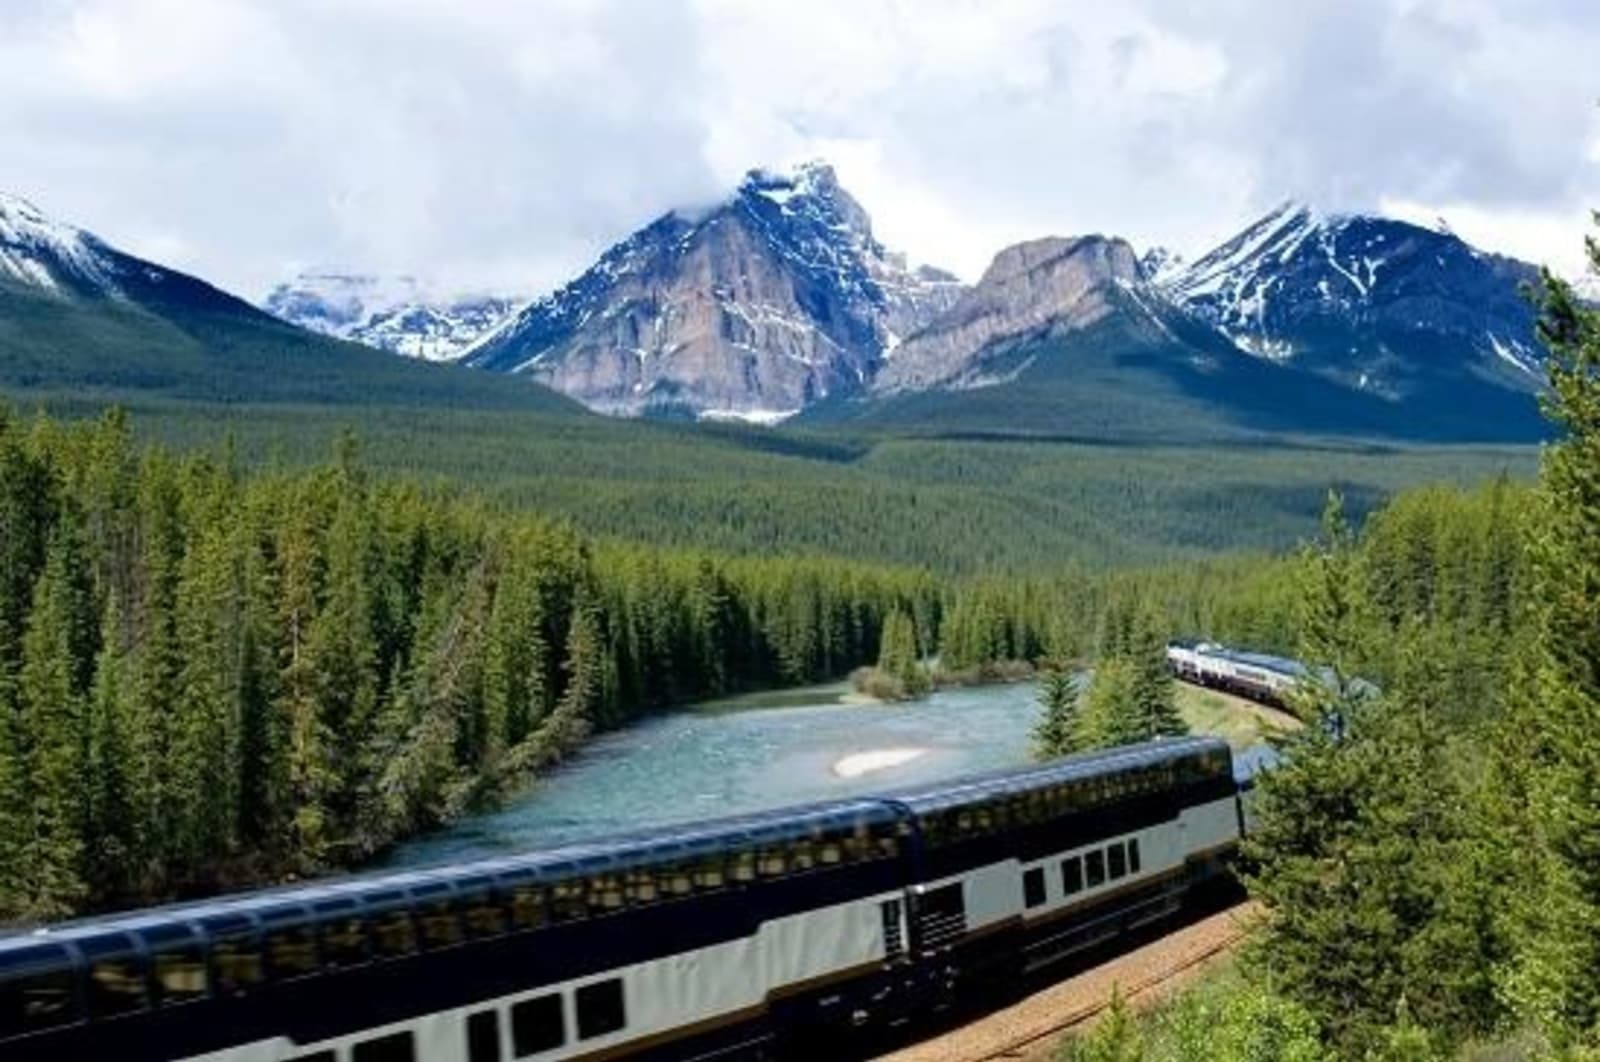 Train going through the trees in the Rocky Mountains.